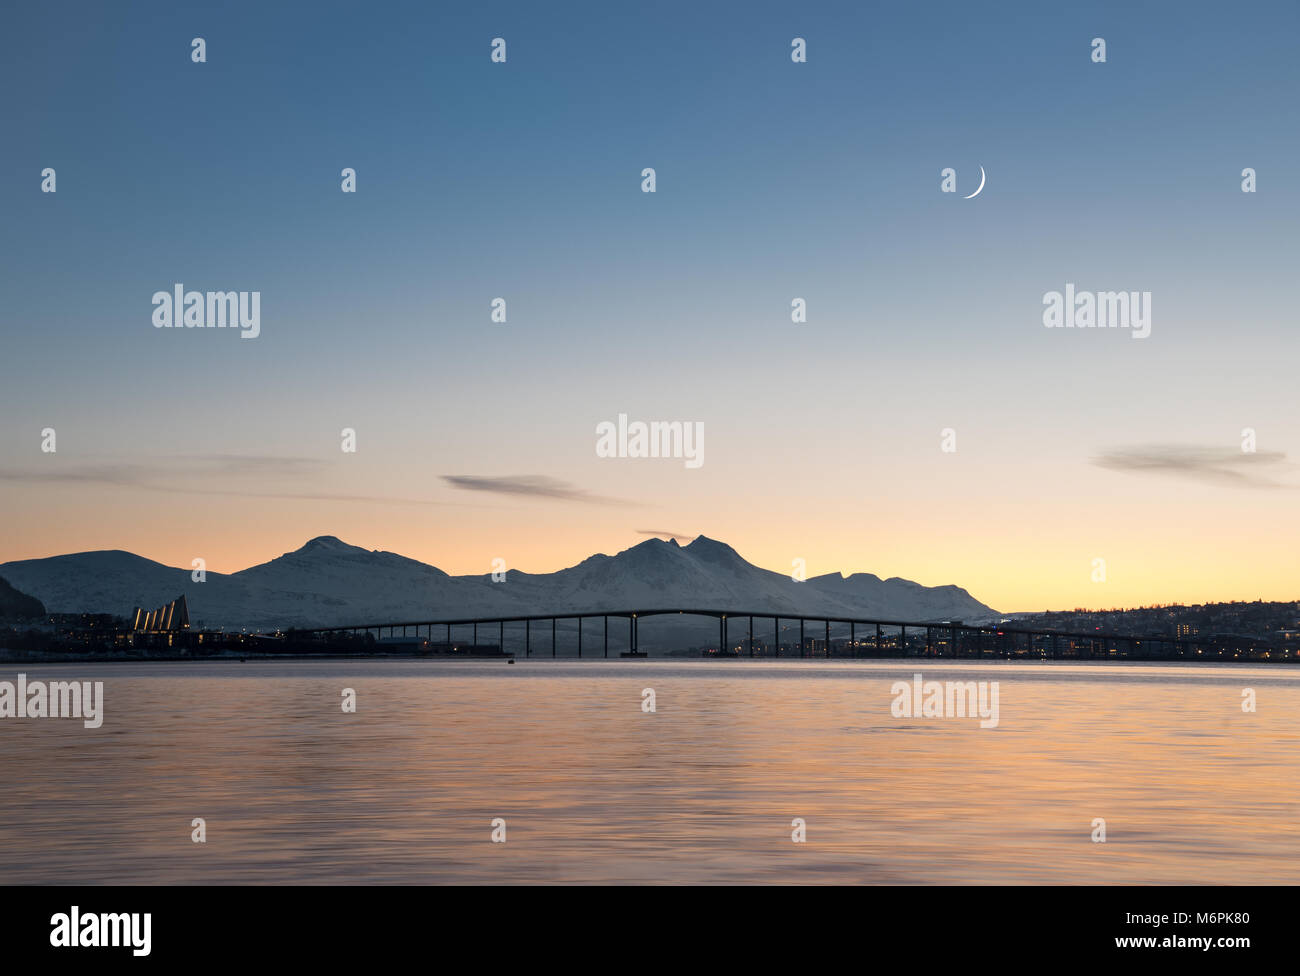 NORWAY, TROMSO - JANUARY 18, 2018: Panoramic view of arctic town Tromso during beautiful dusk with mountains and horned moon background Stock Photo